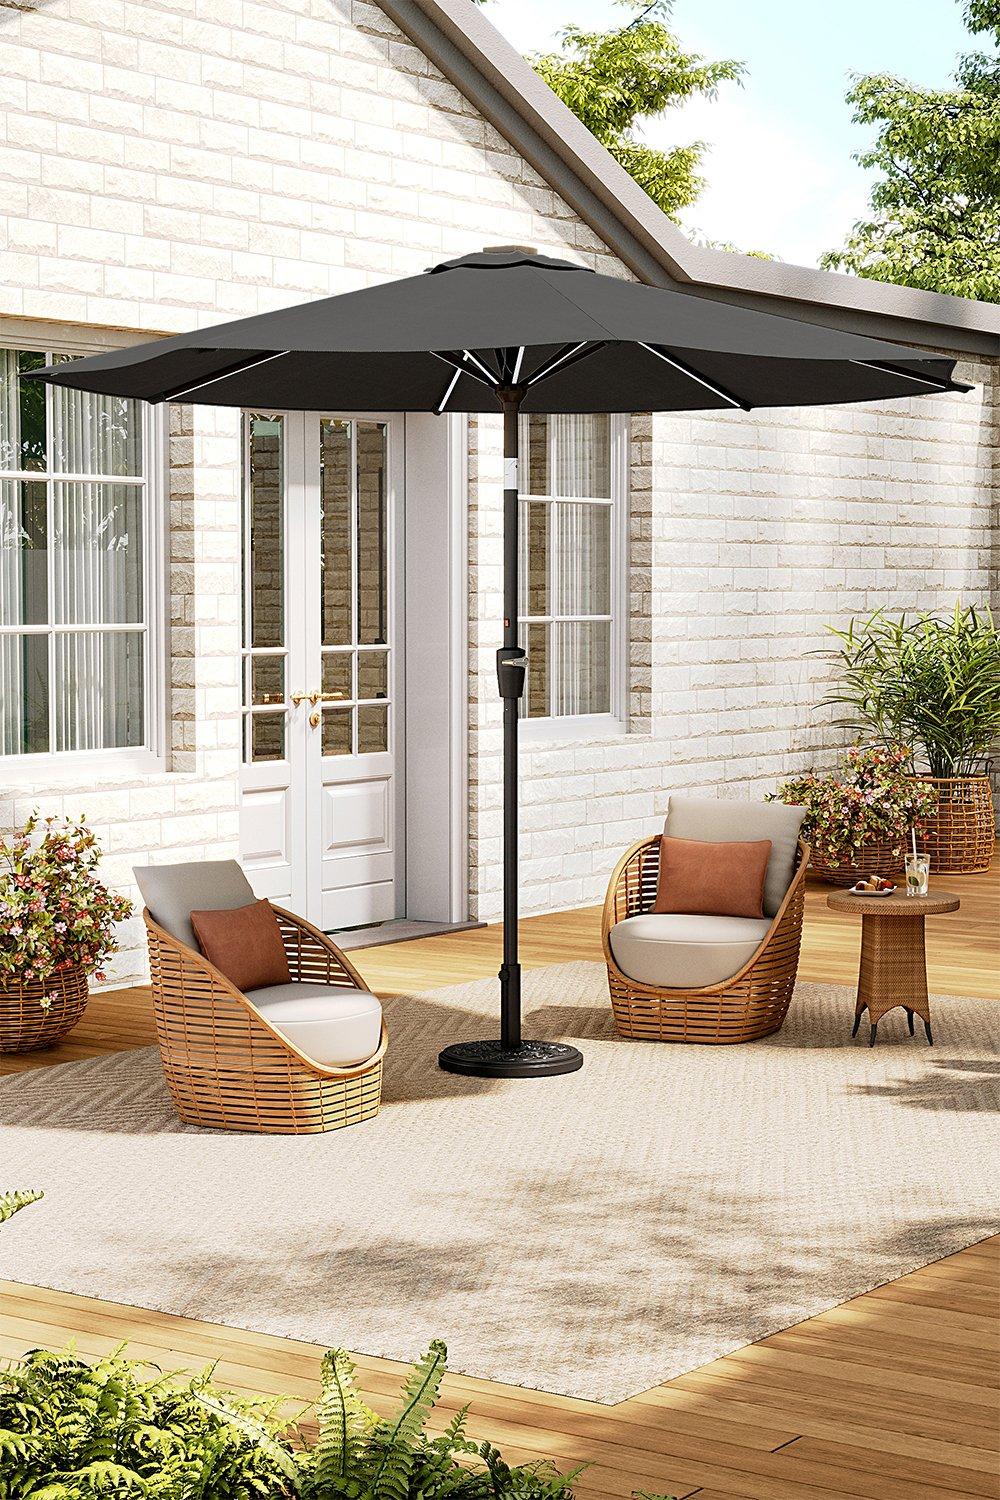 Large Solar Powered LED Patio Umbrella for Outdoor Garden Patio with Base